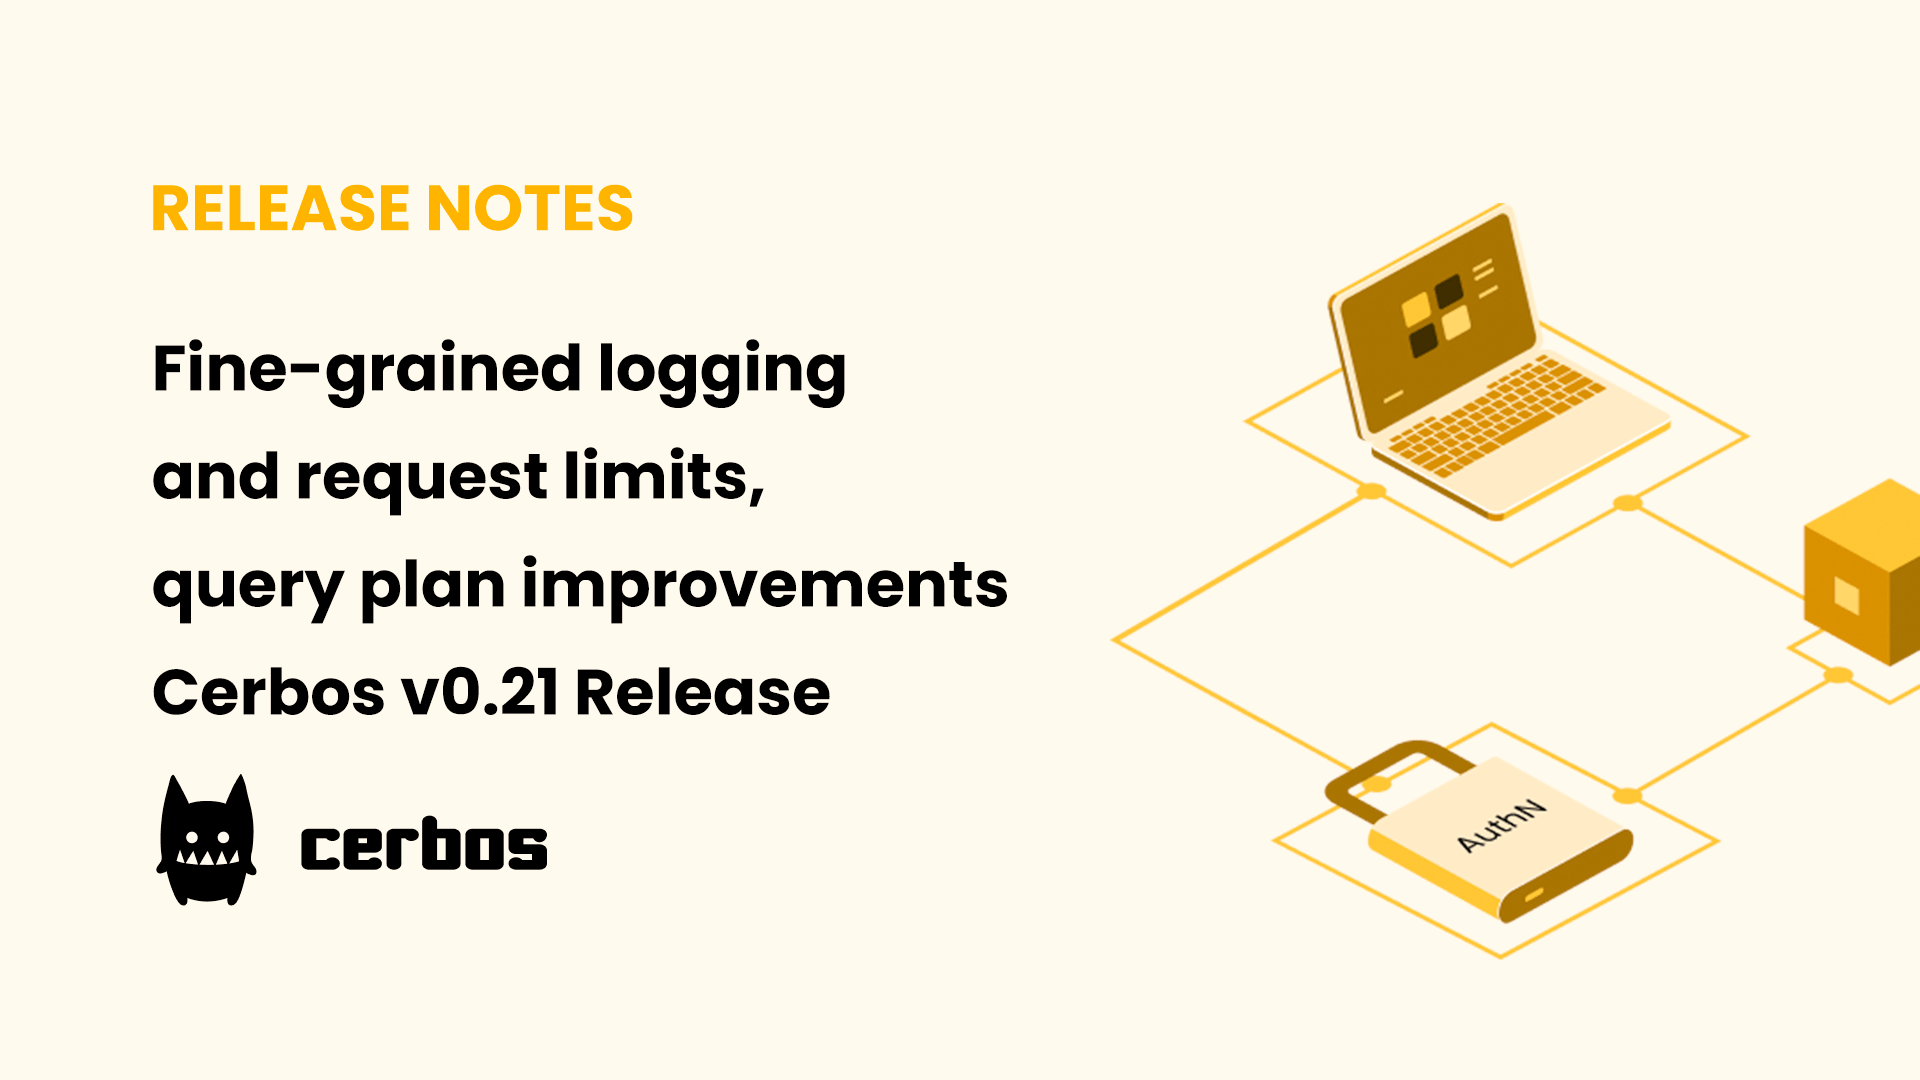 Fine-grained logging and request limits, query plan improvements - Cerbos v0.21 Release